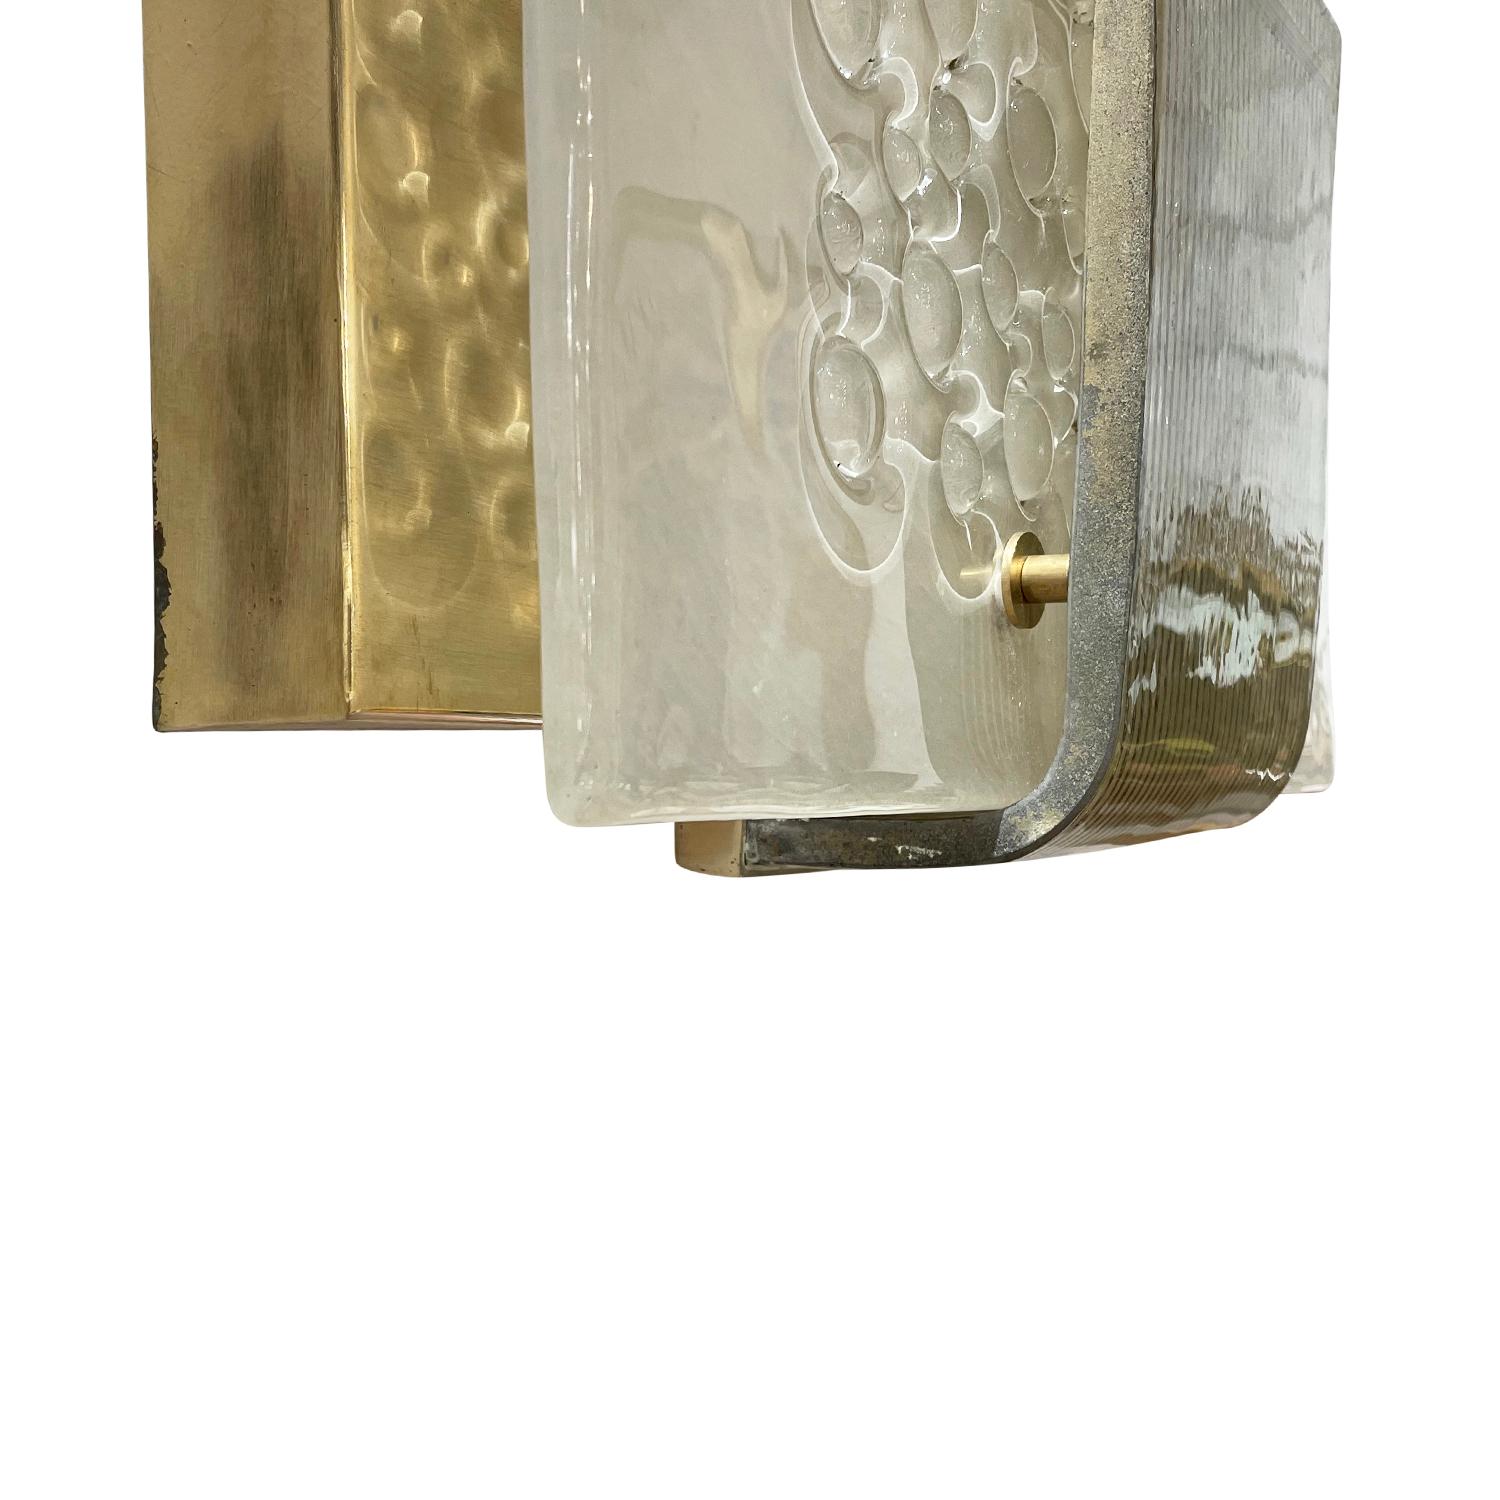 20th Century Italian Pair of Rectangular Murano Glass Waterfall Wall Lights In Good Condition For Sale In West Palm Beach, FL